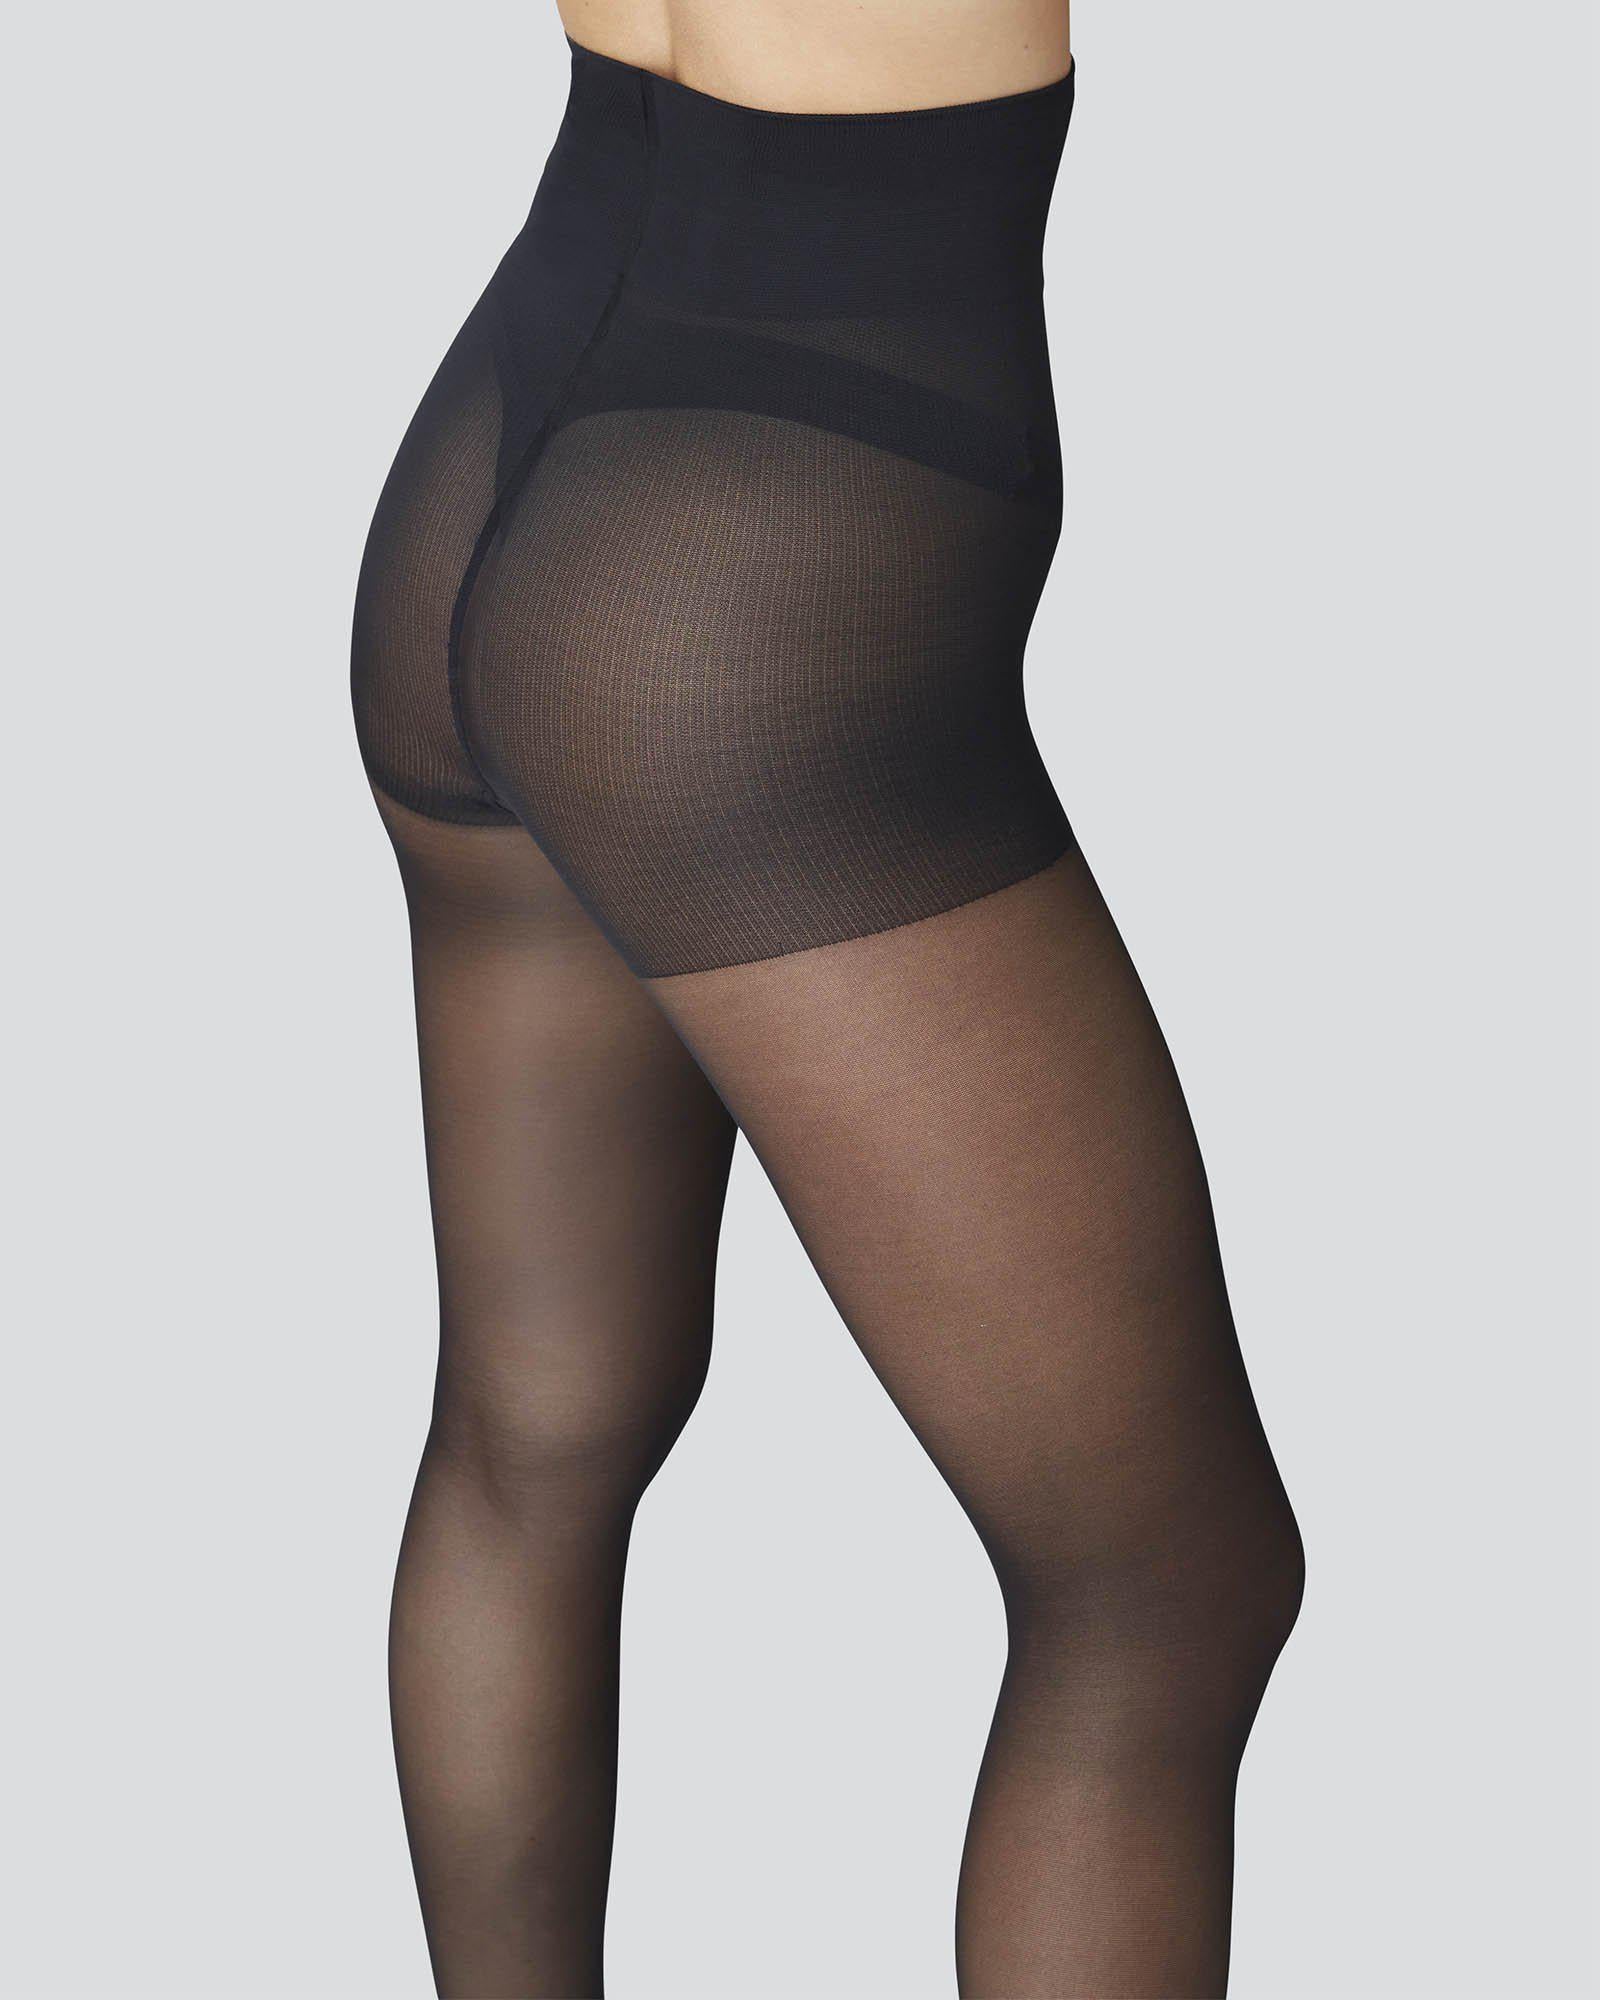 Irma Support Tights - S / Black